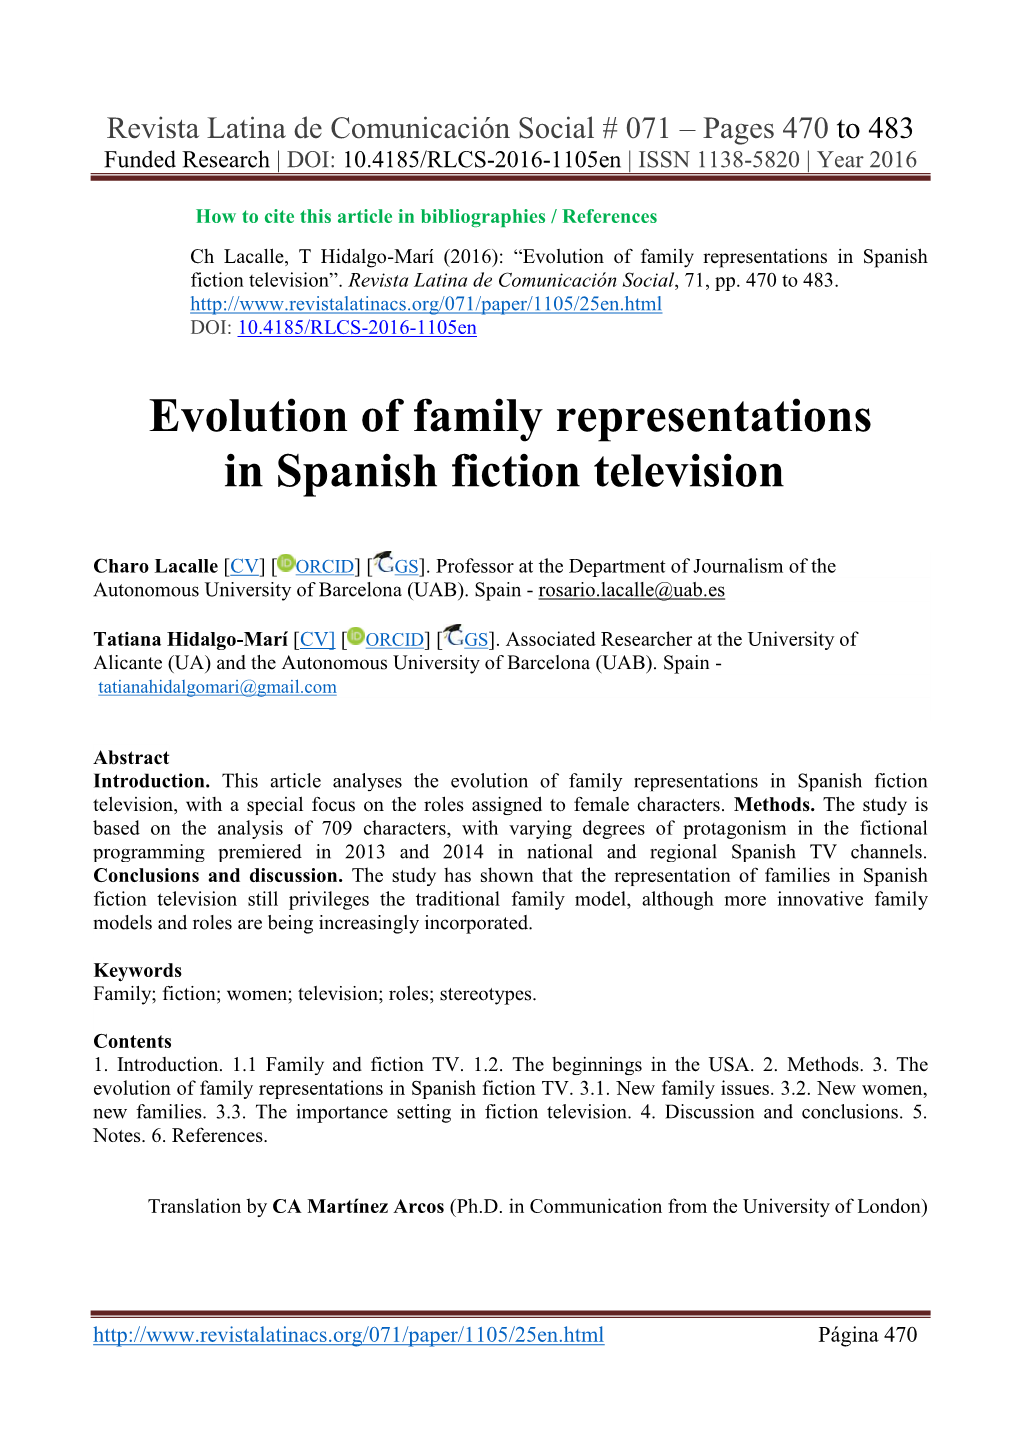 Evolution of Family Representations in Spanish Fiction Television”